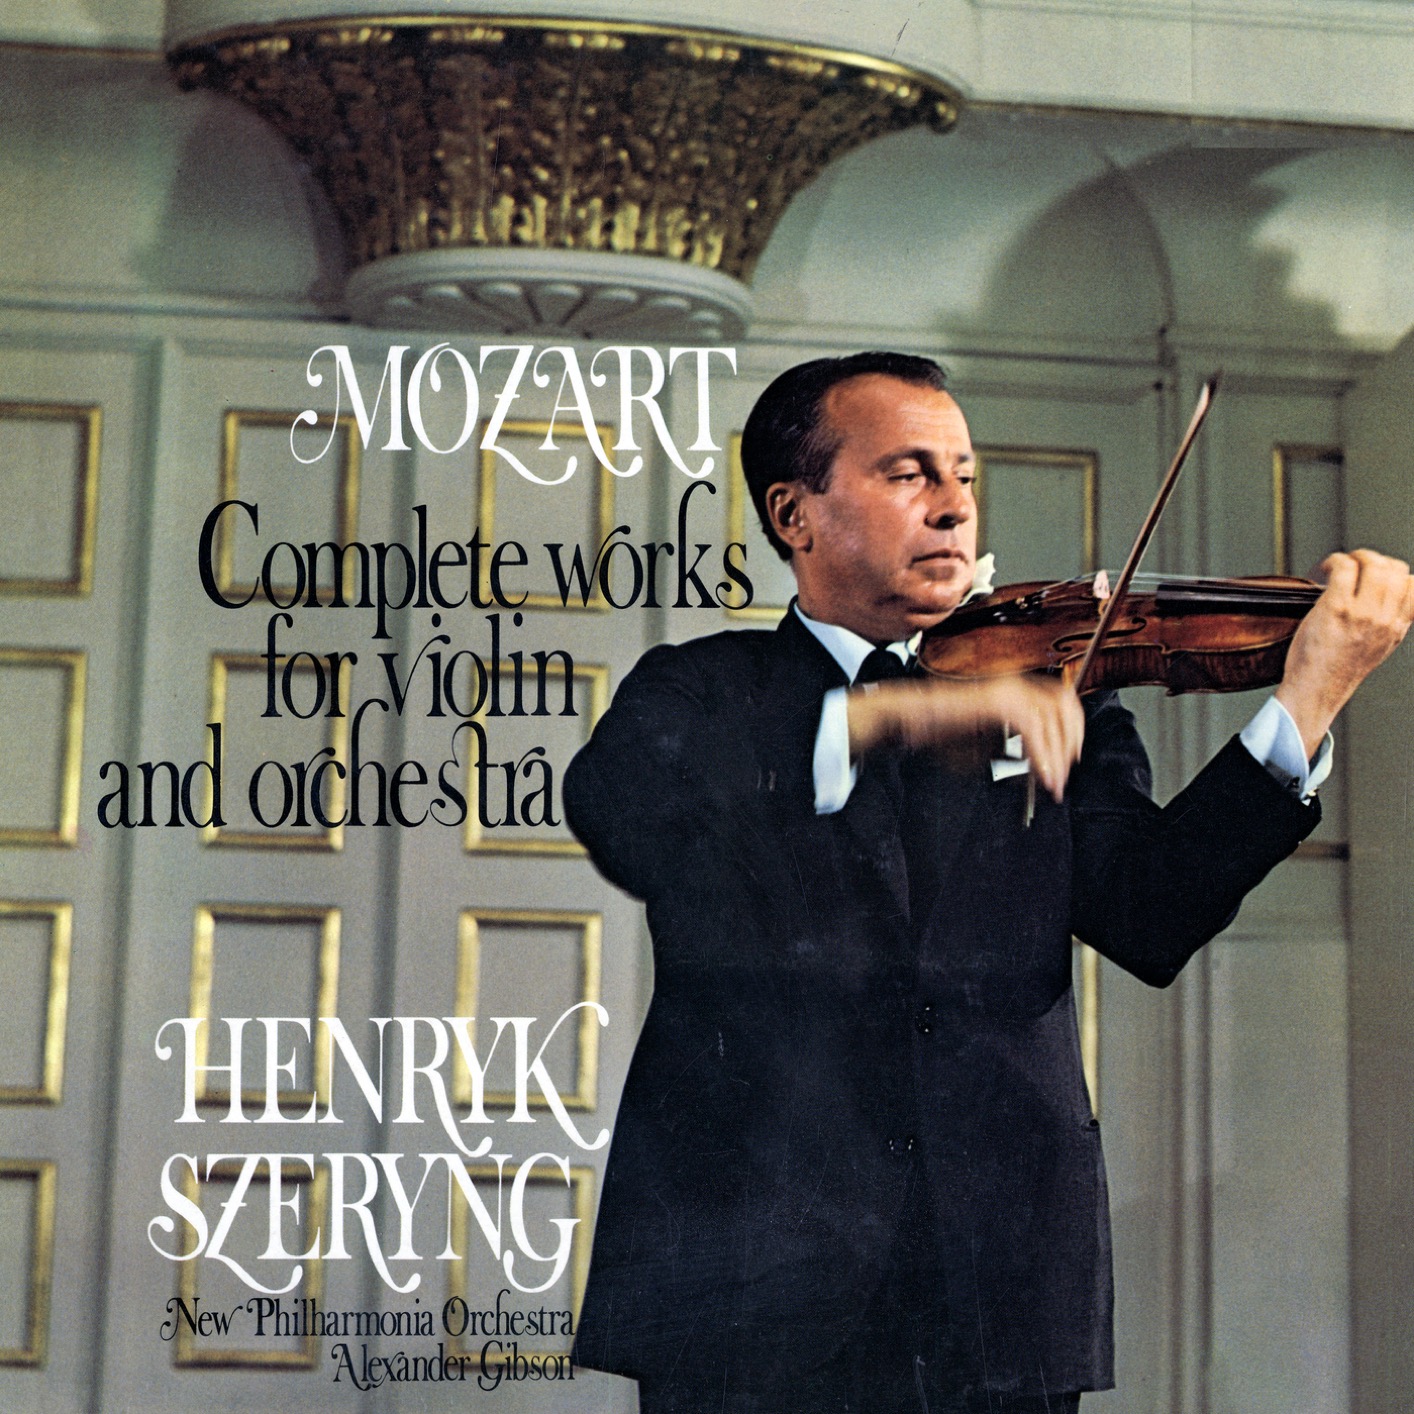 Henryk Szeryng – Mozart: Complete Works for Violin and Orchestra (Remastered) (2018) [FLAC 24bit/96kHz]